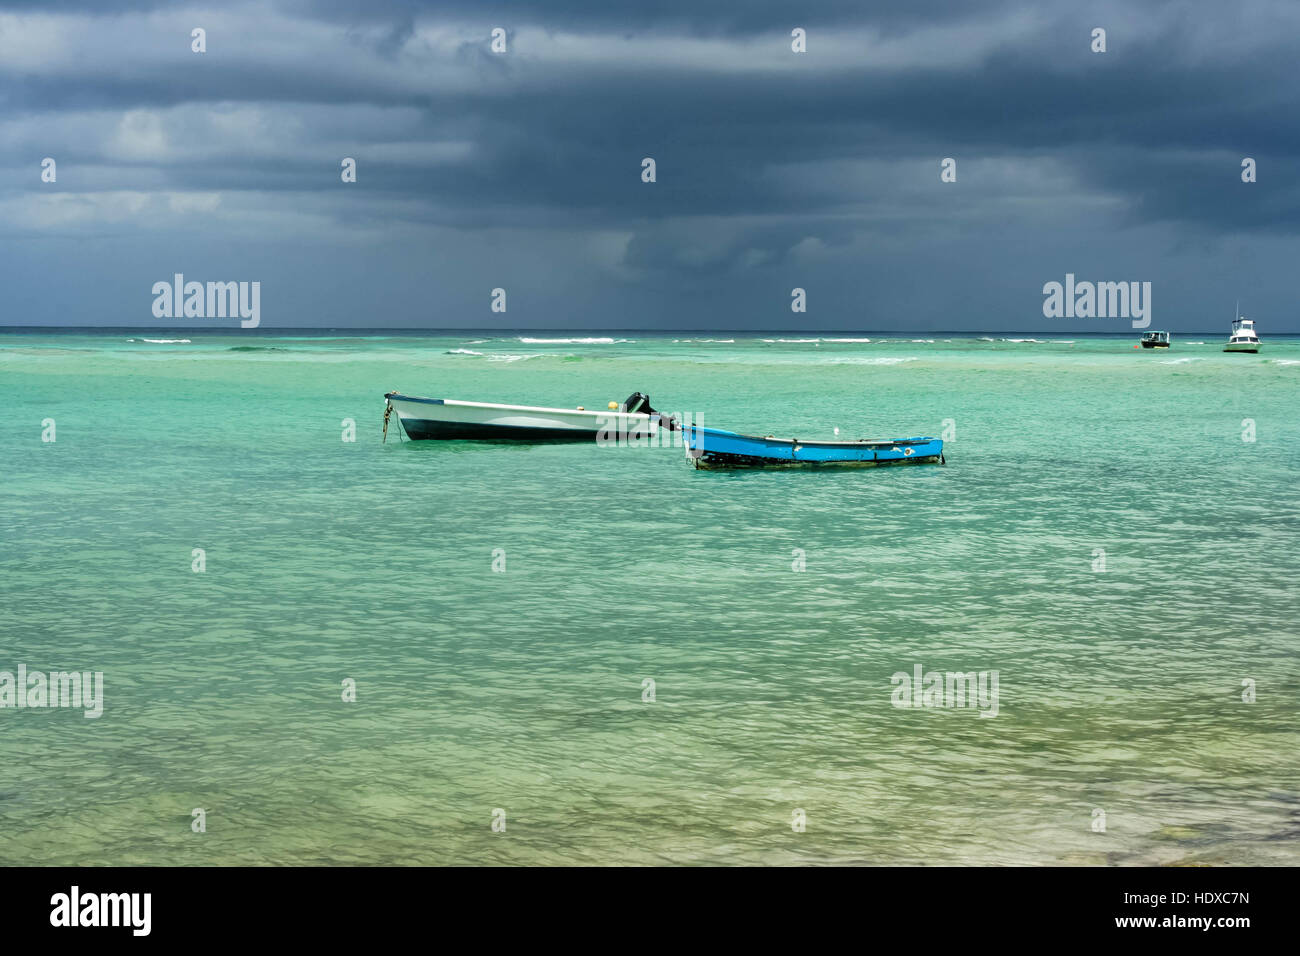 Two old fishing boats in clear sea with a storm background Stock Photo